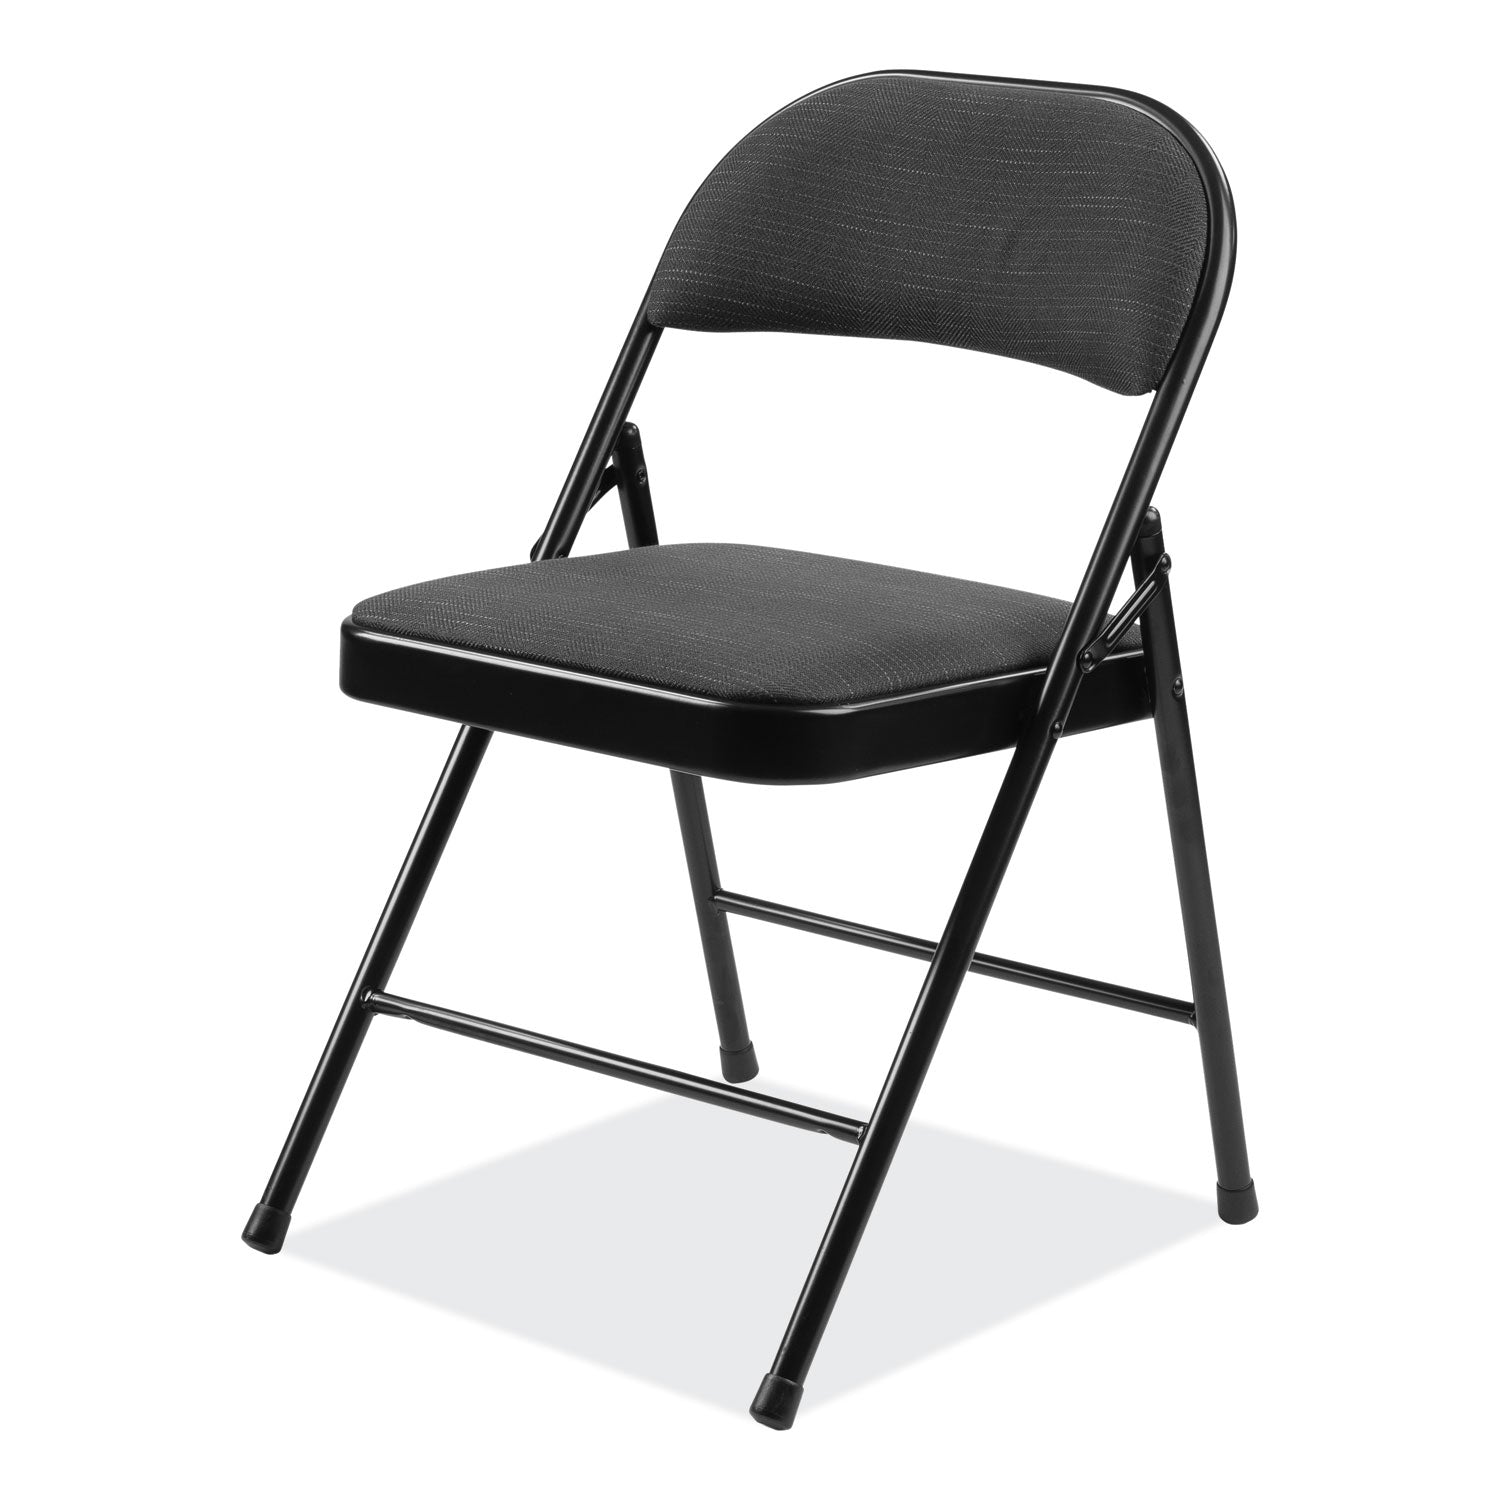 970-series-fabric-padded-steel-folding-chair-supports-250-lb-1775-seat-ht-star-trail-black-4-ct-ships-in-1-3-bus-days_nps970 - 3